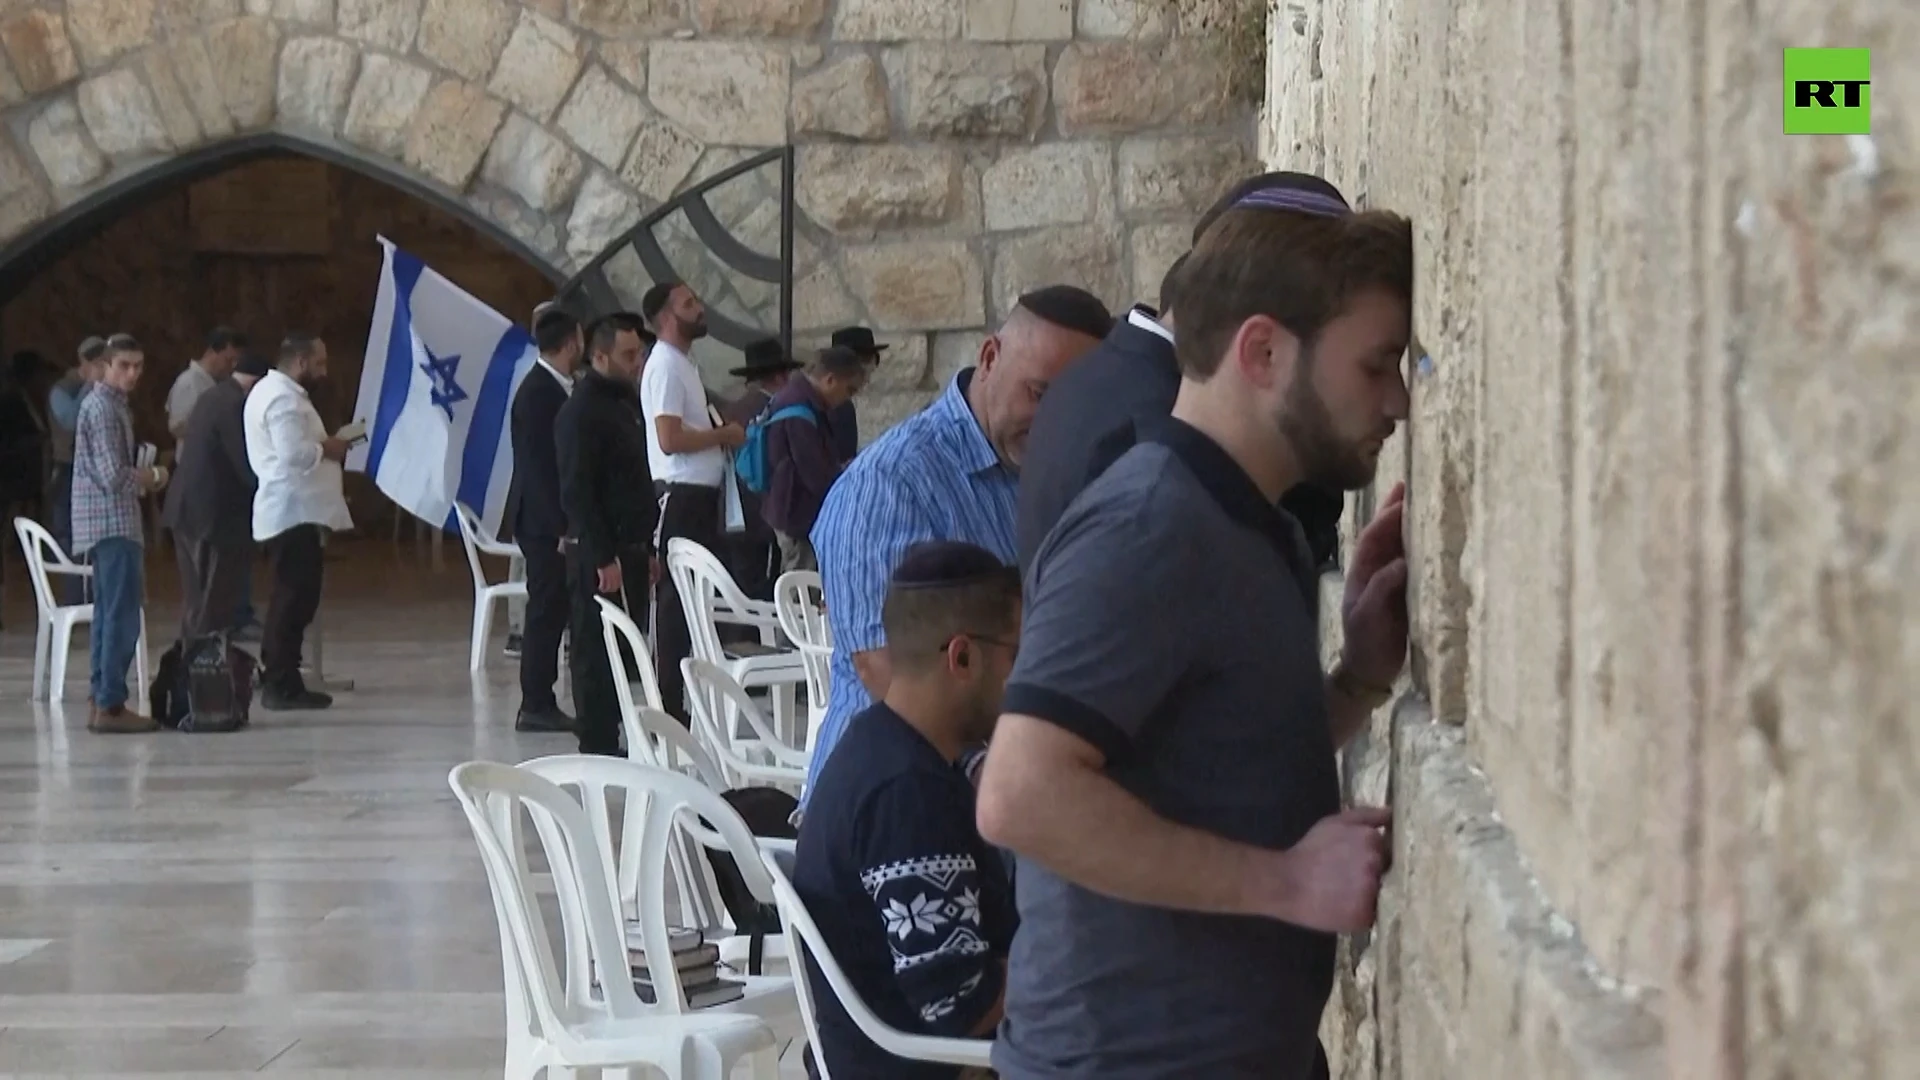 Israelis pray at Western Wall for safe return of captives from Gaza